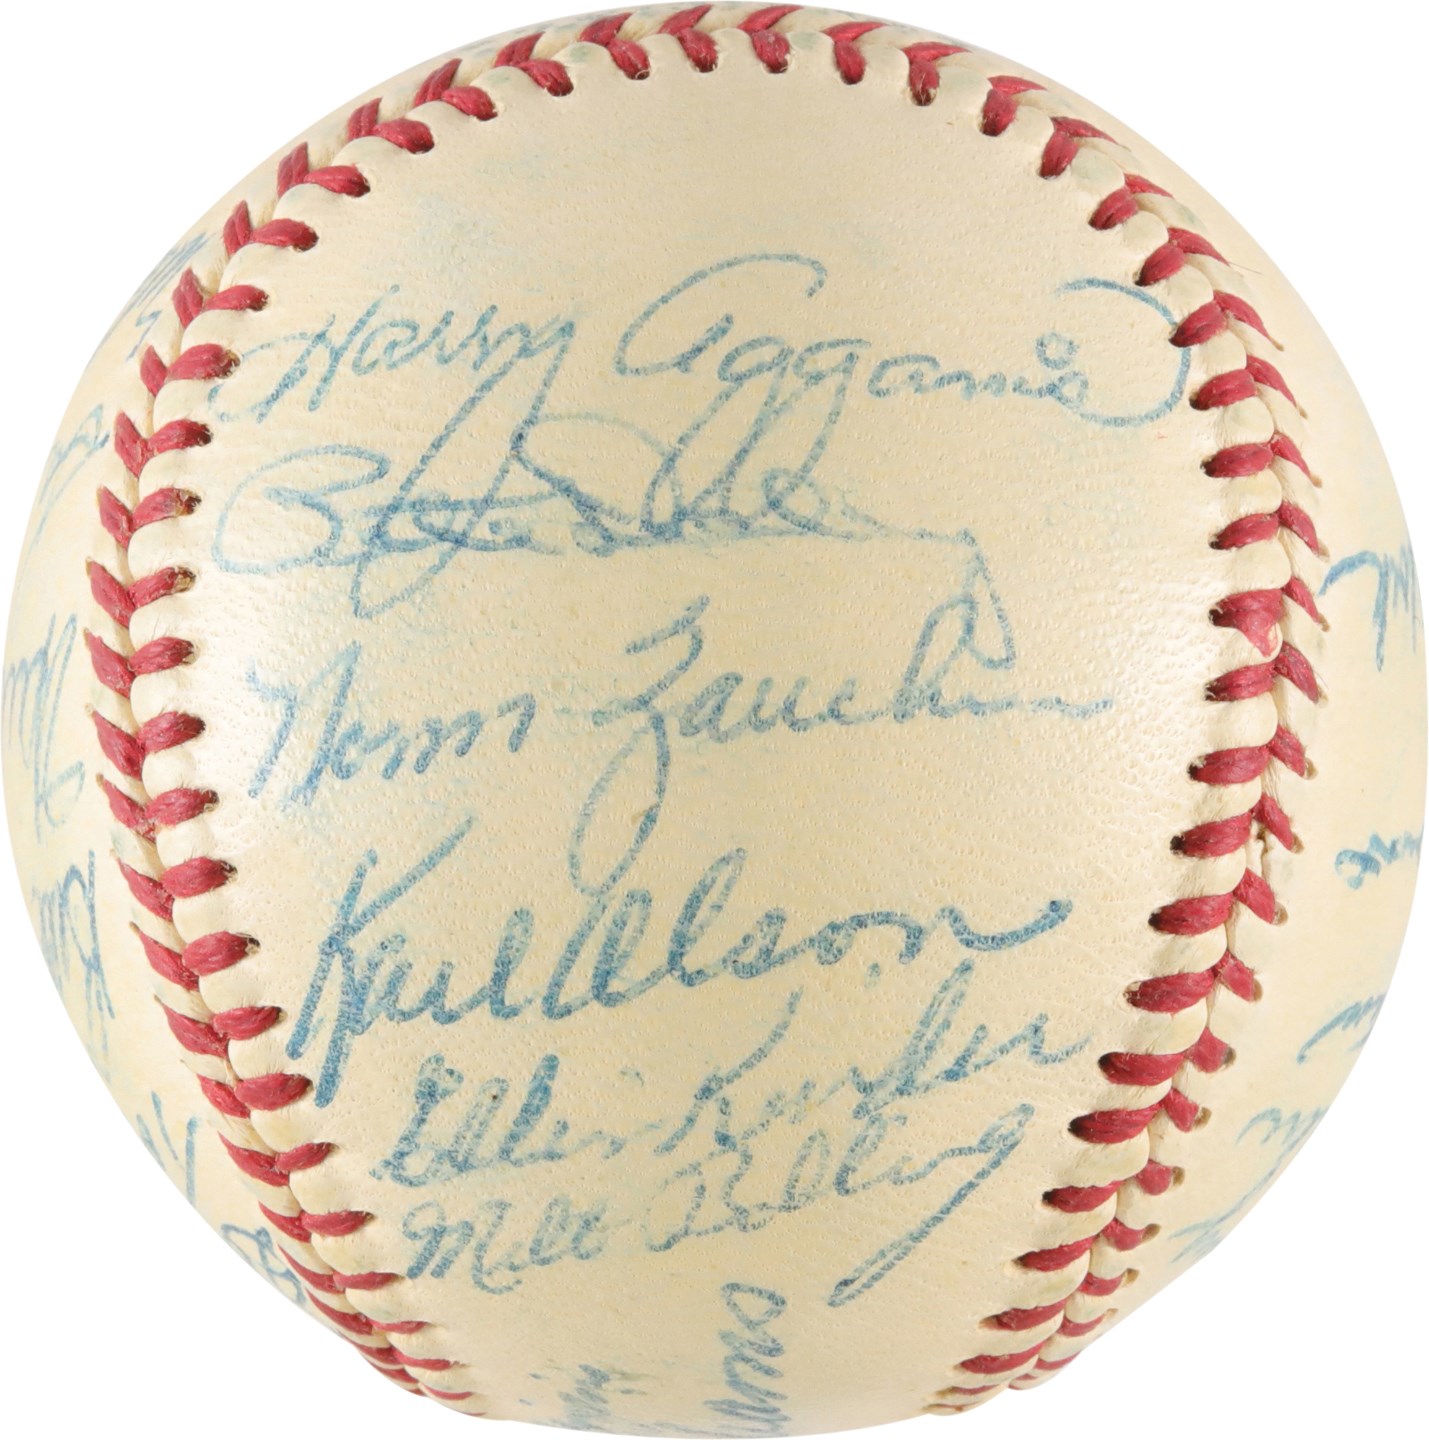 - 1955 Boston Red Sox Team-Signed Baseball w/Harry Agganis In Original Mailing Box from Tom Yawkey (PSA)